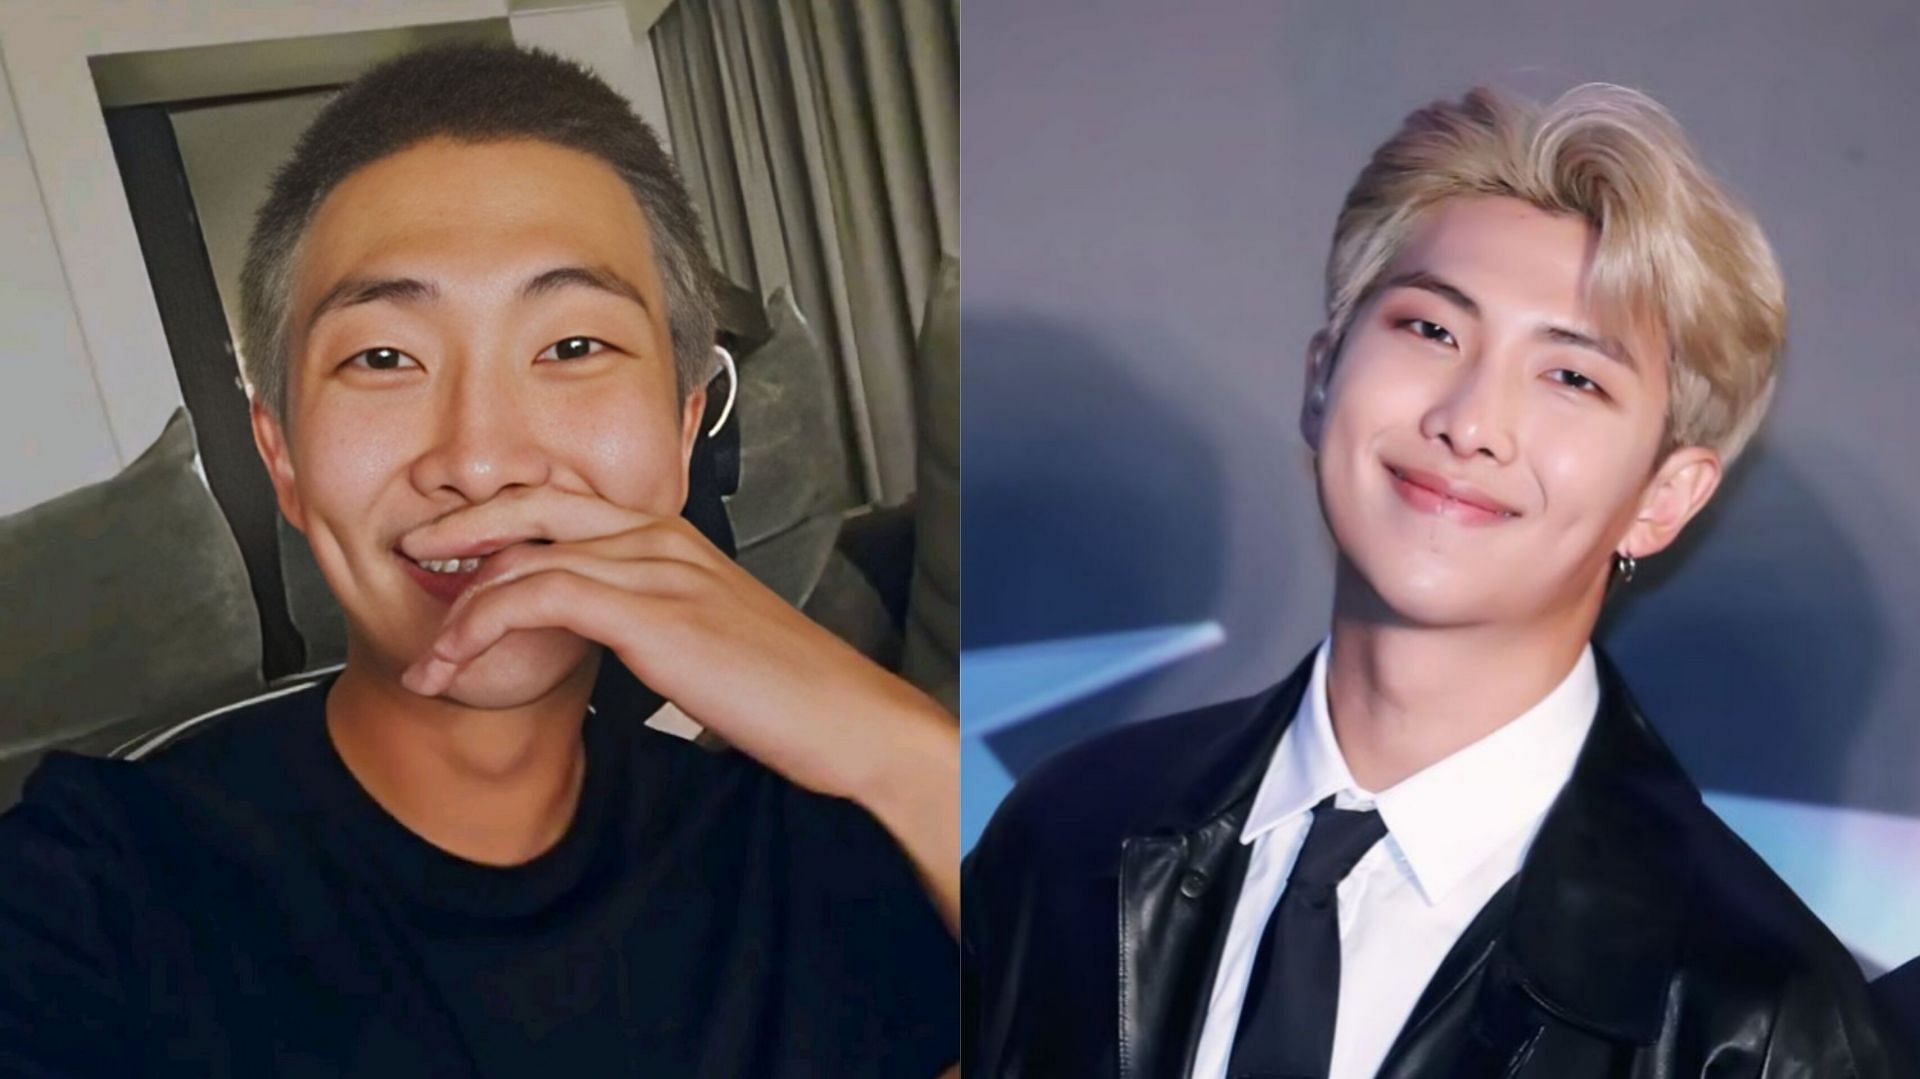 BTS' RM teases fan with potential new music on his Instagram story